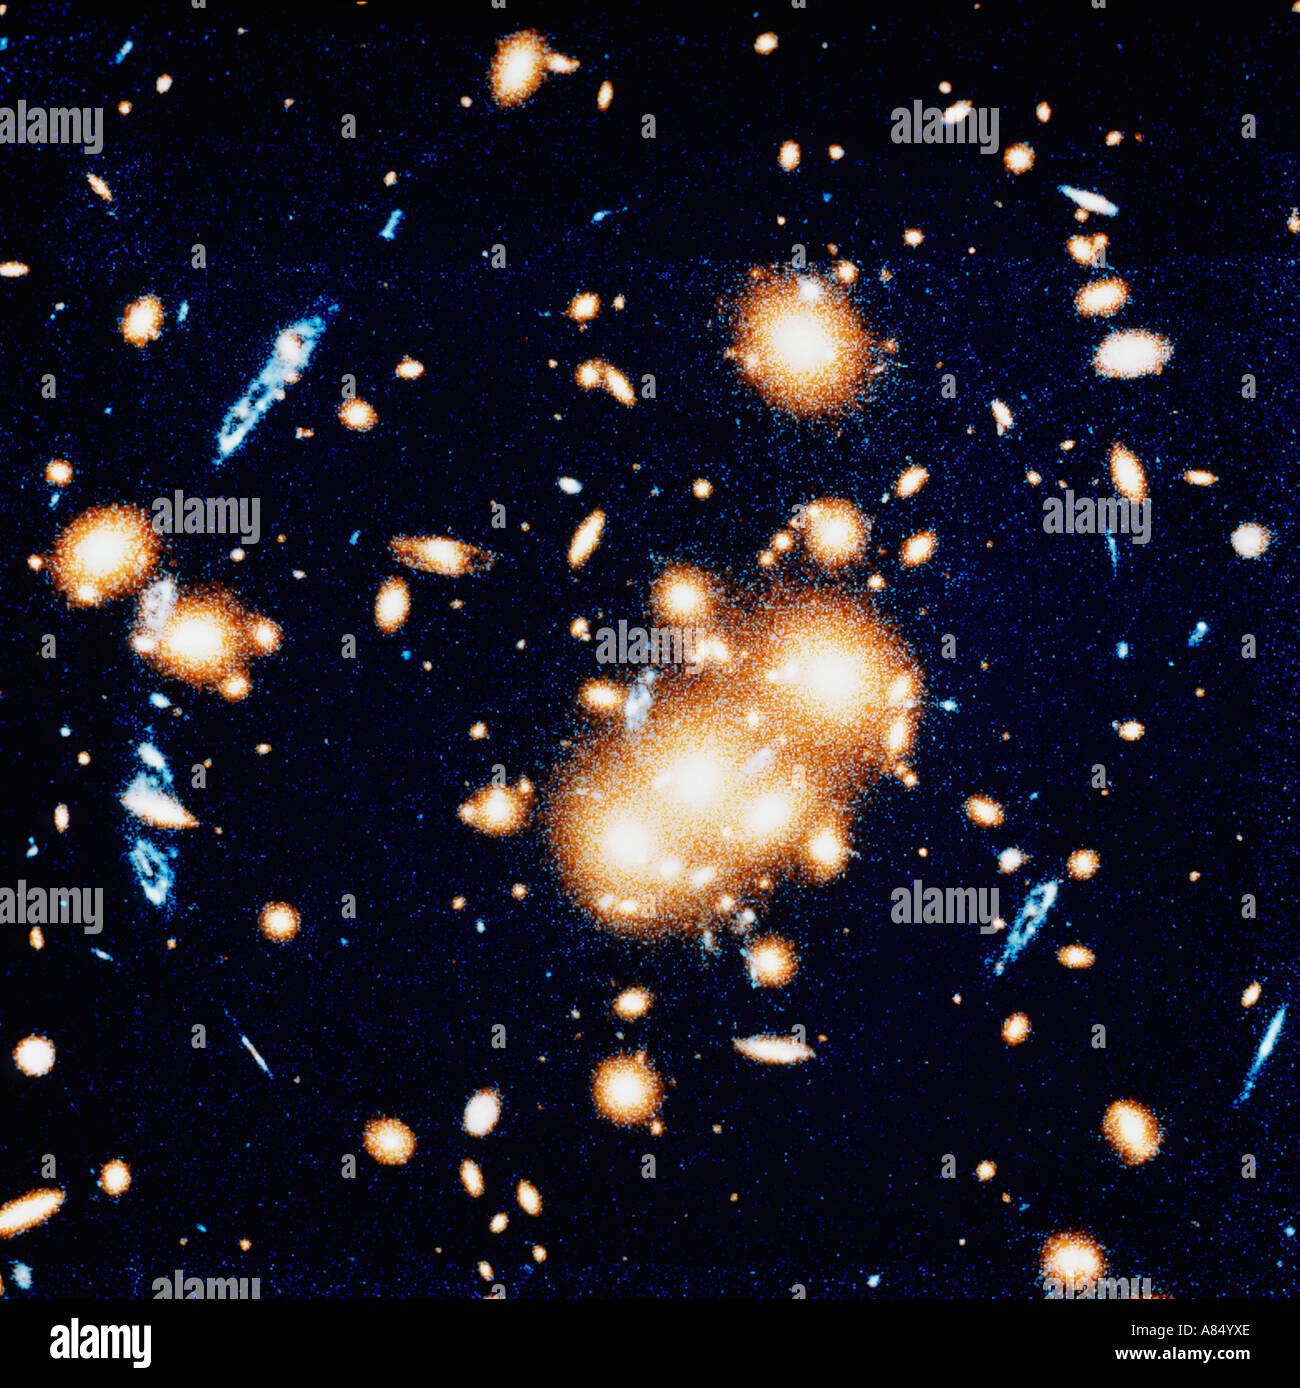 Space and astronomy. Hubble telescope image. Deep view of the Universe showing the earliest formed galaxies. Stock Photo